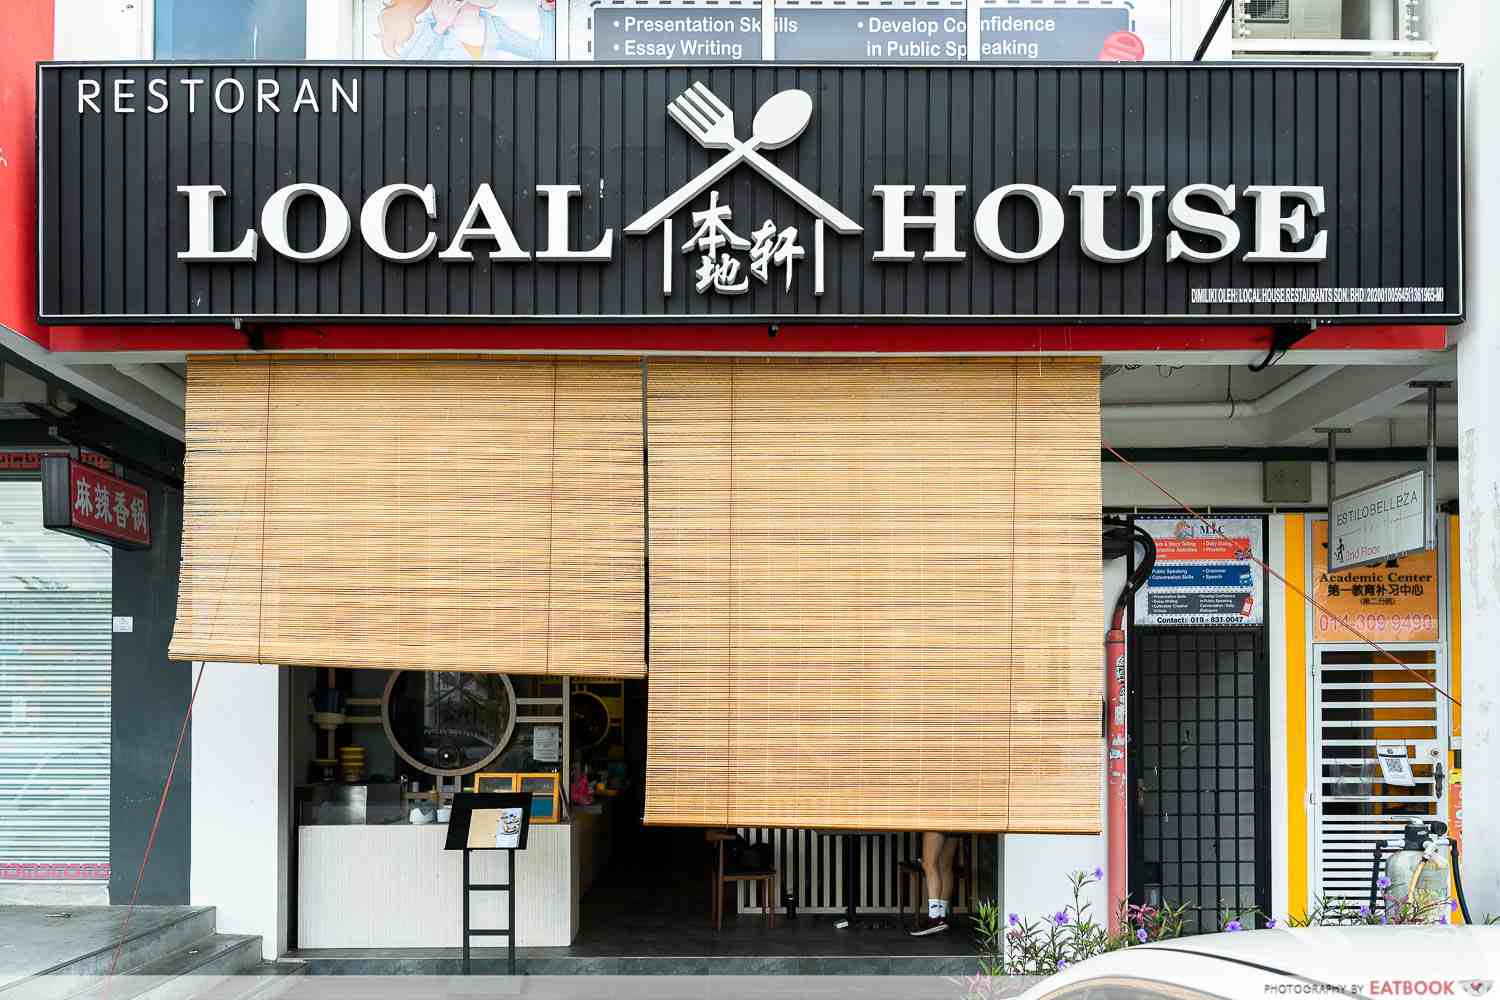 local-house-storefront